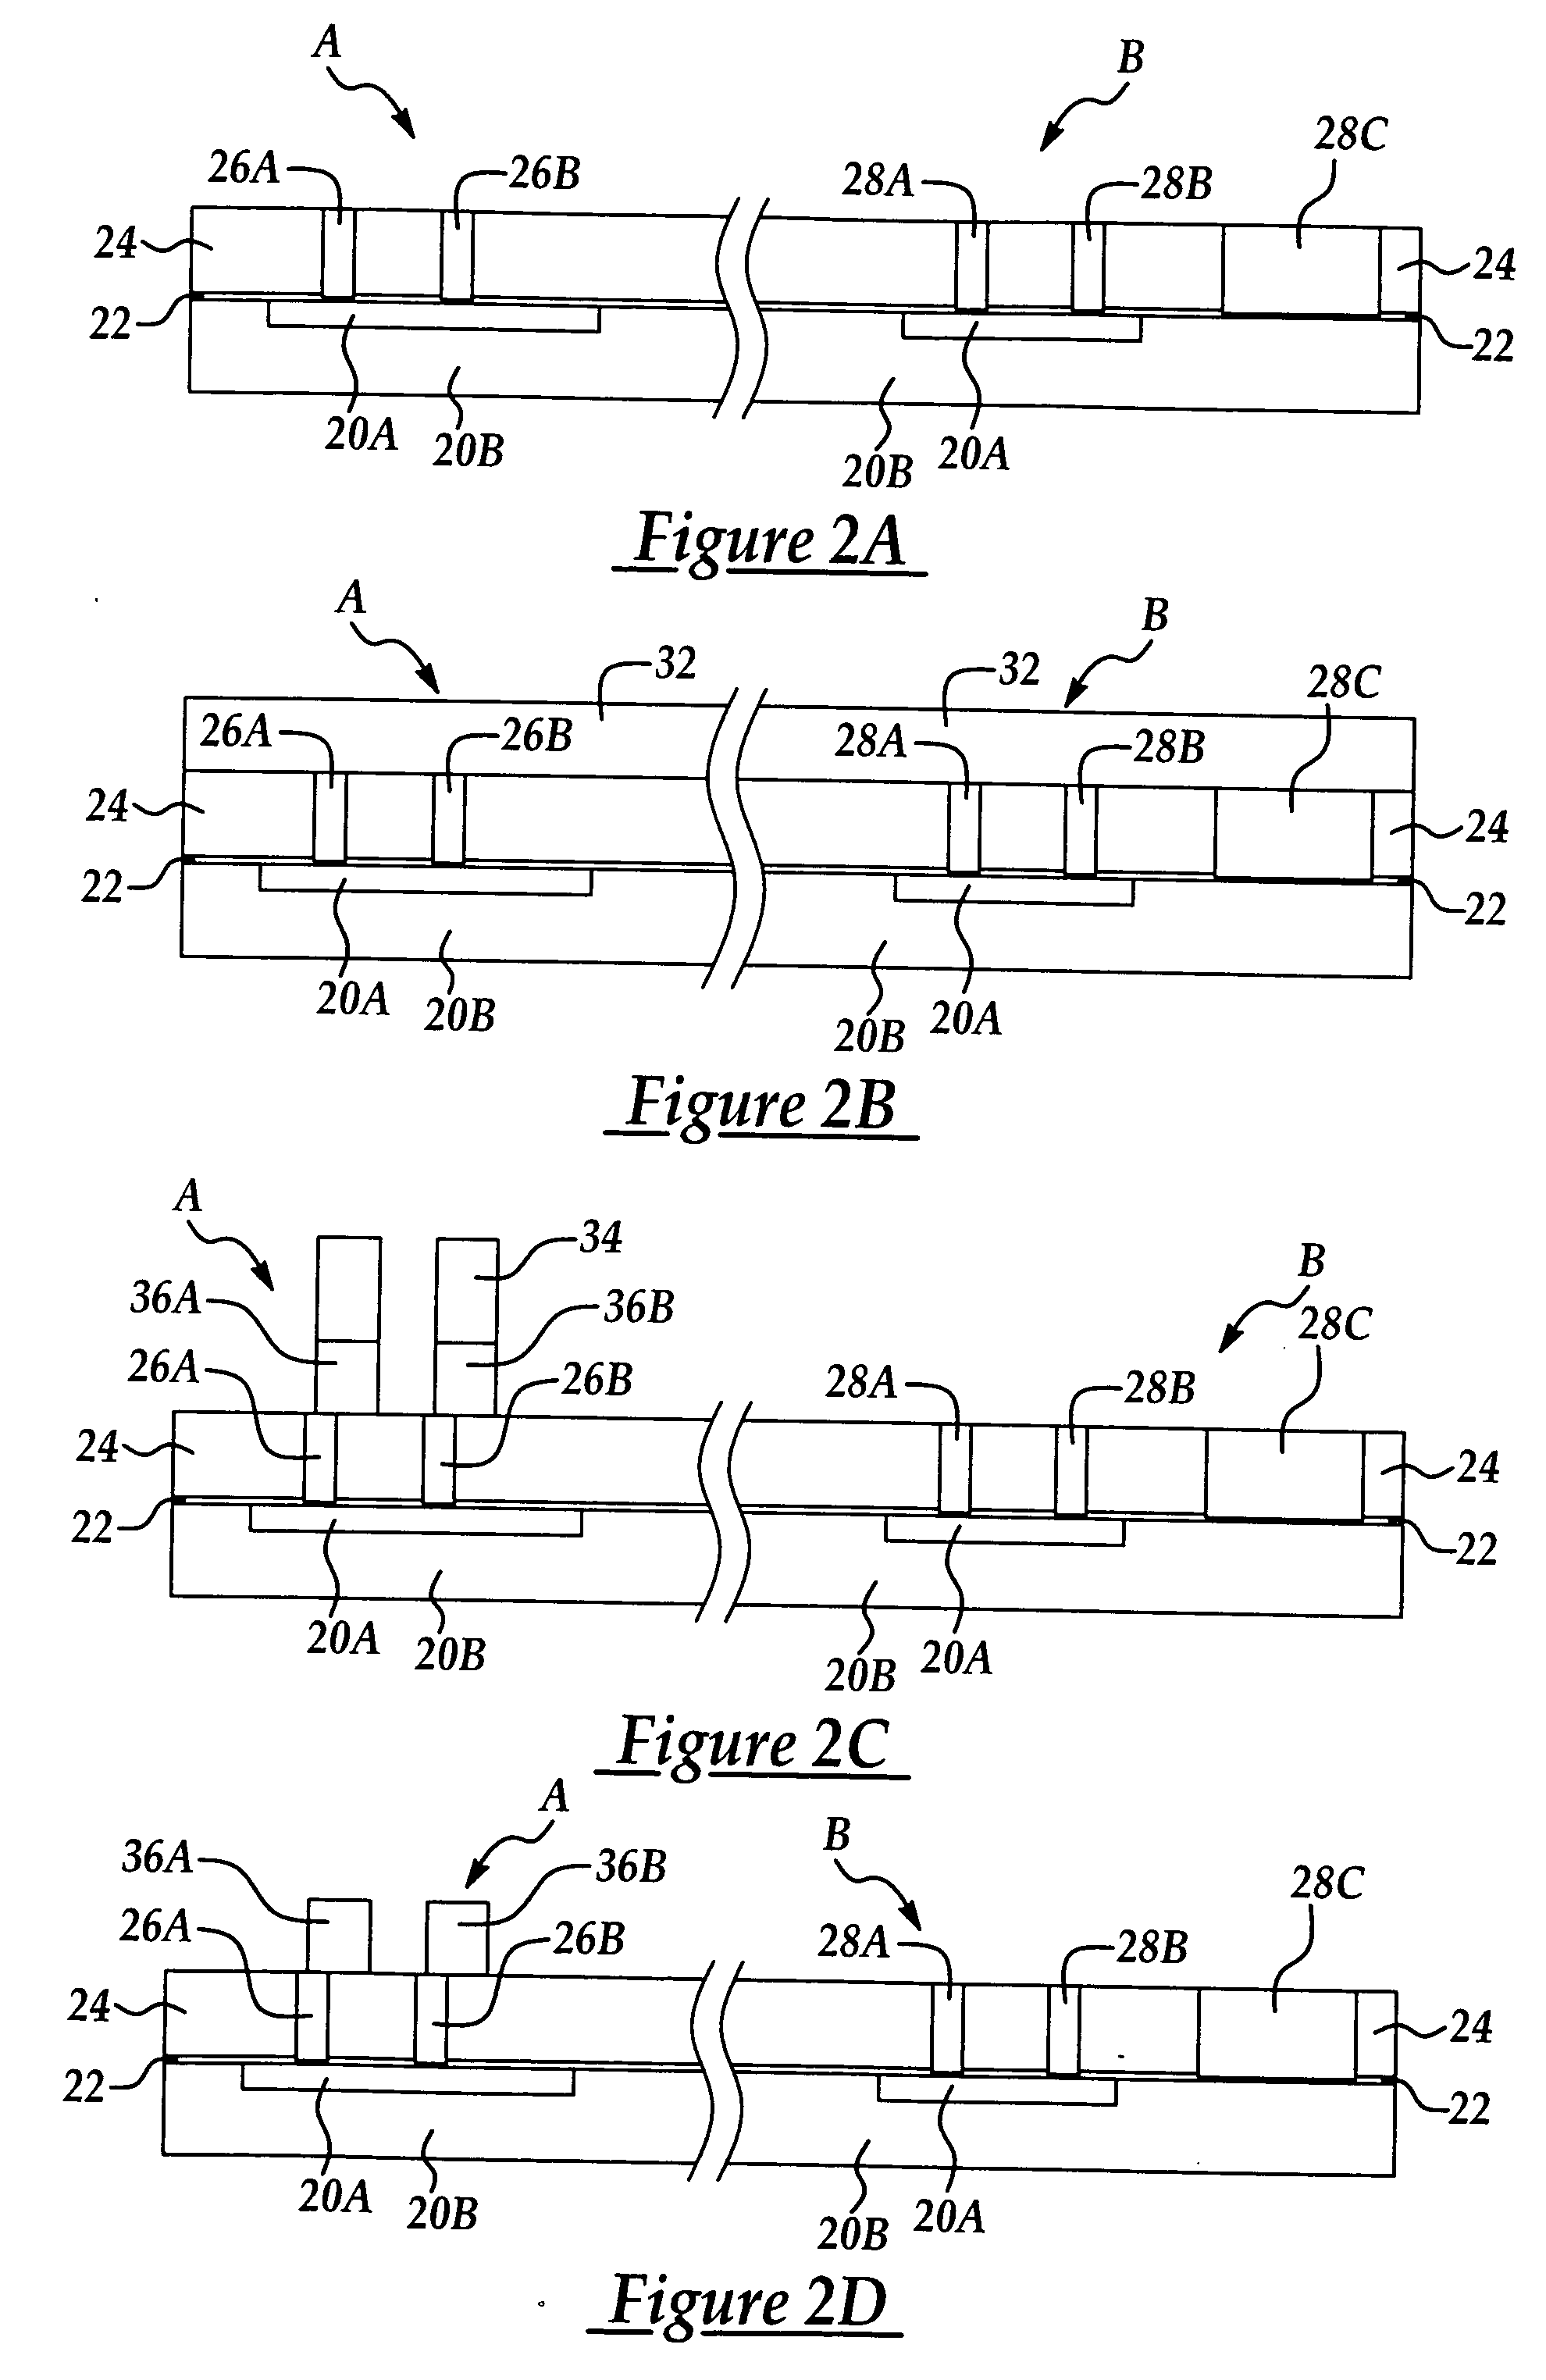 Via array monitor and method of monitoring induced electrical charging